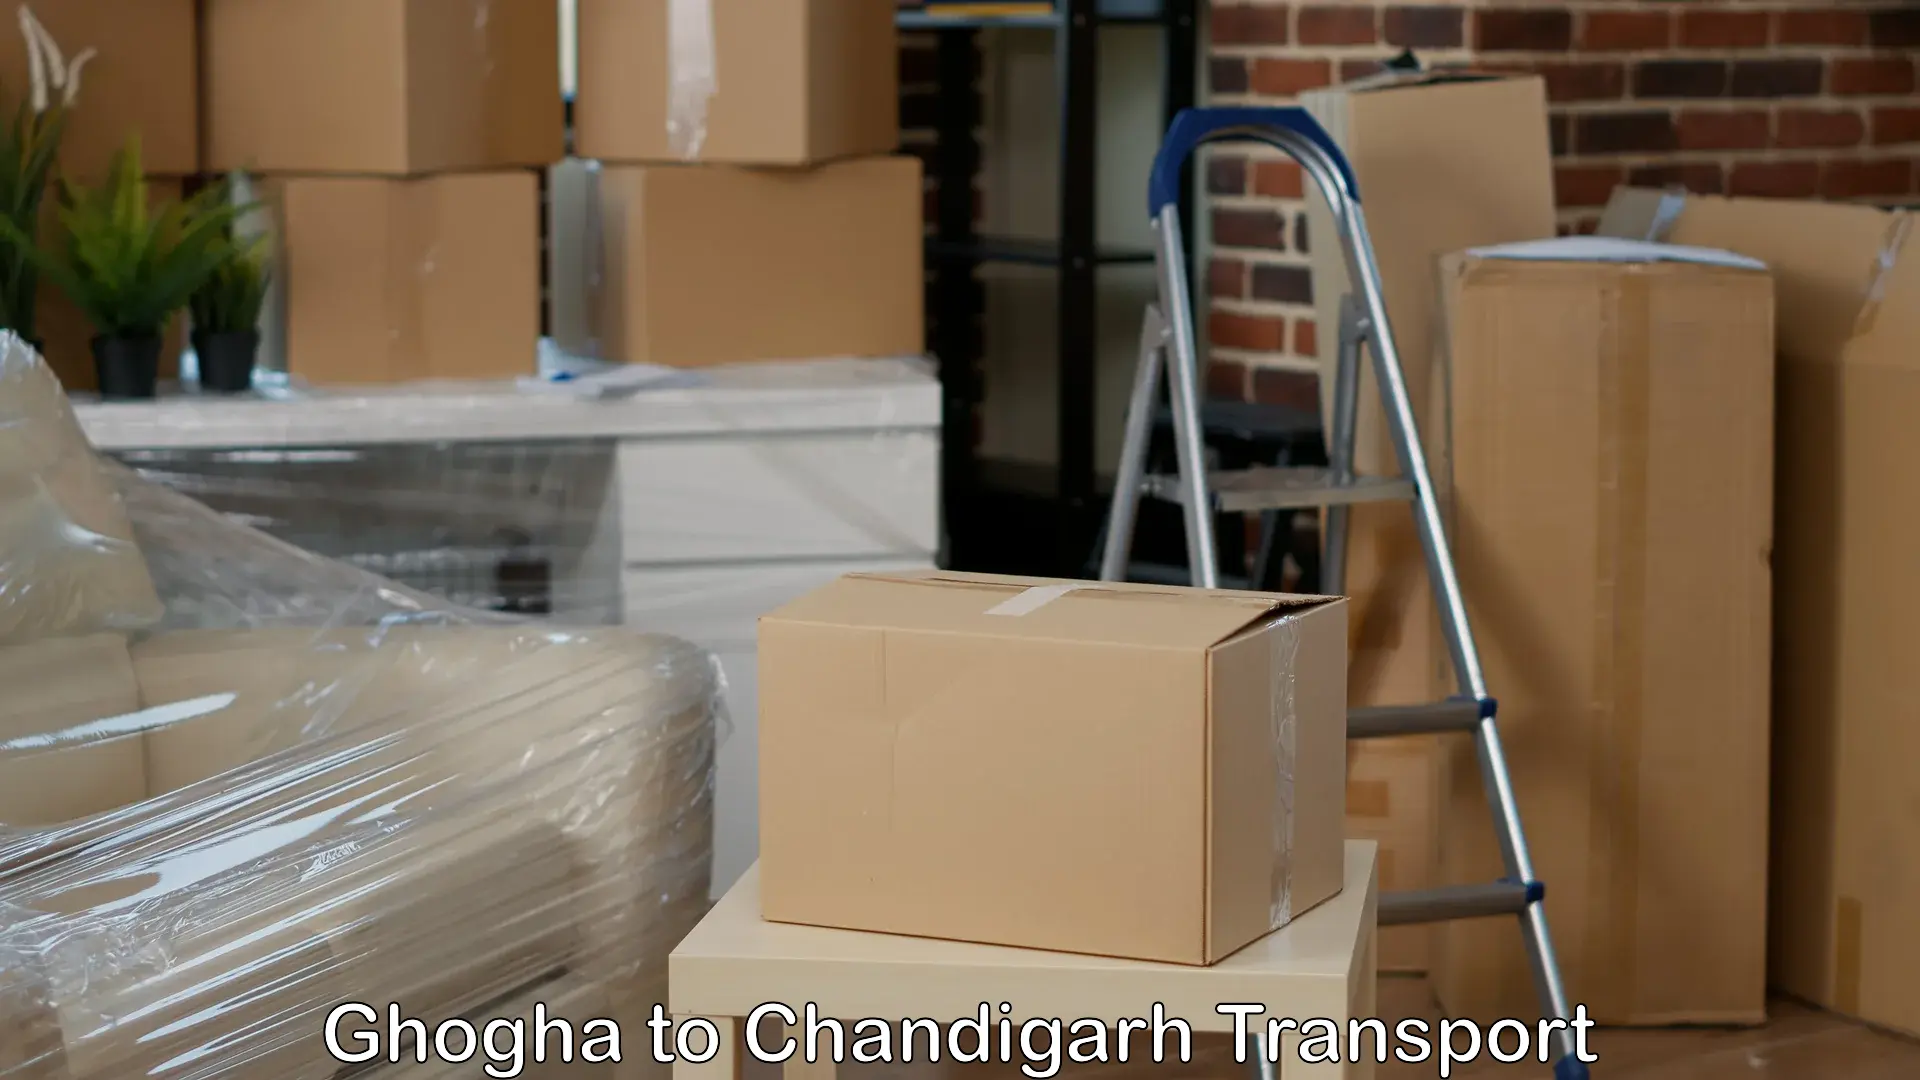 Truck transport companies in India Ghogha to Chandigarh